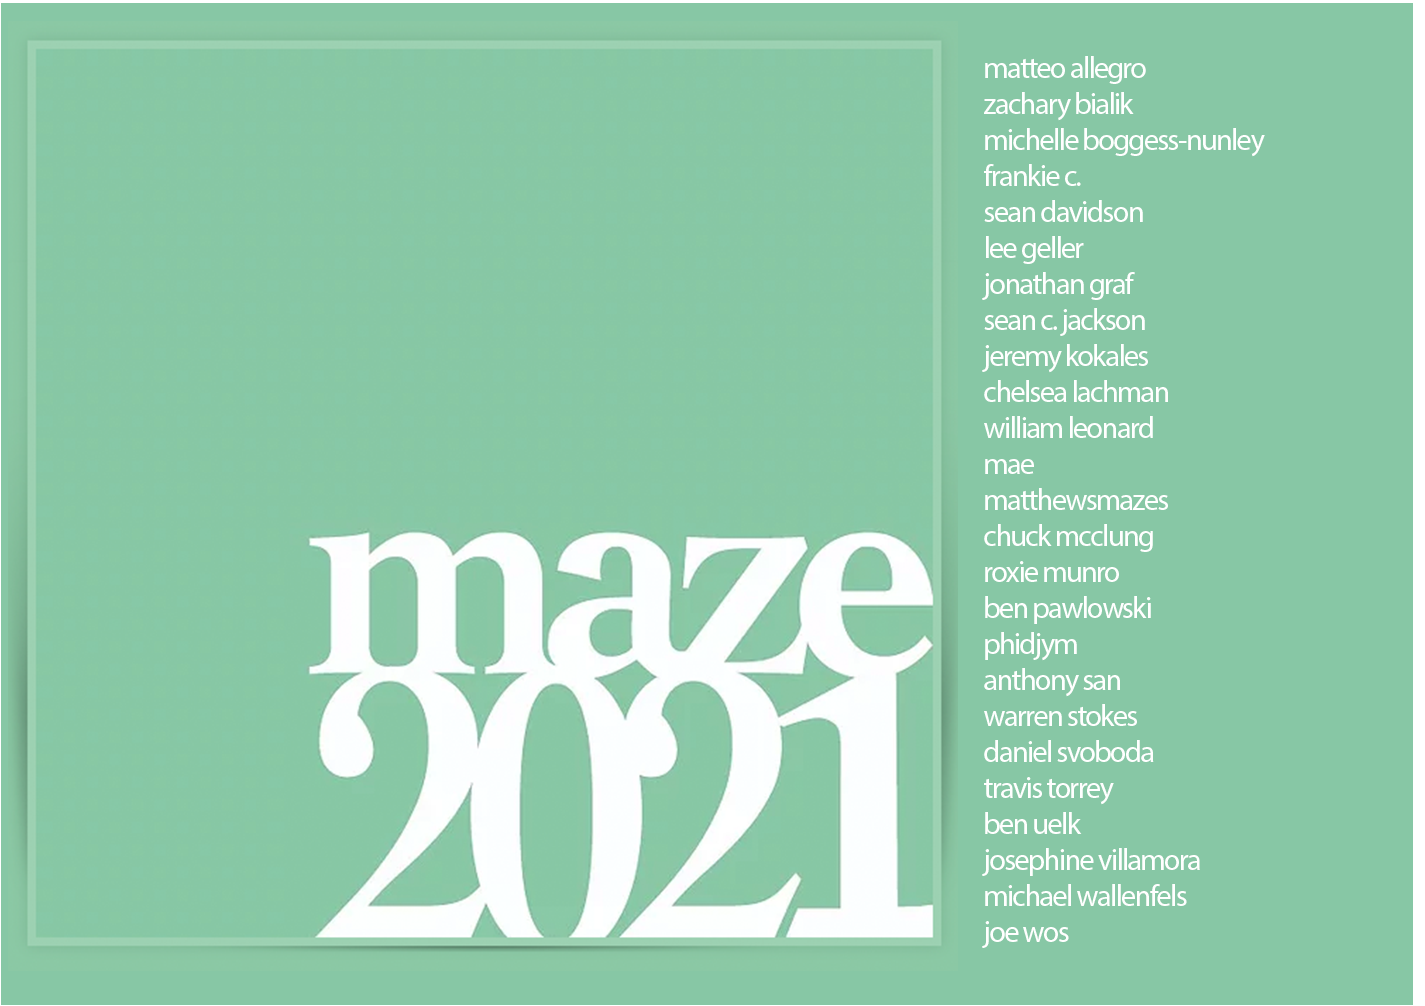 Free download of maze2021.